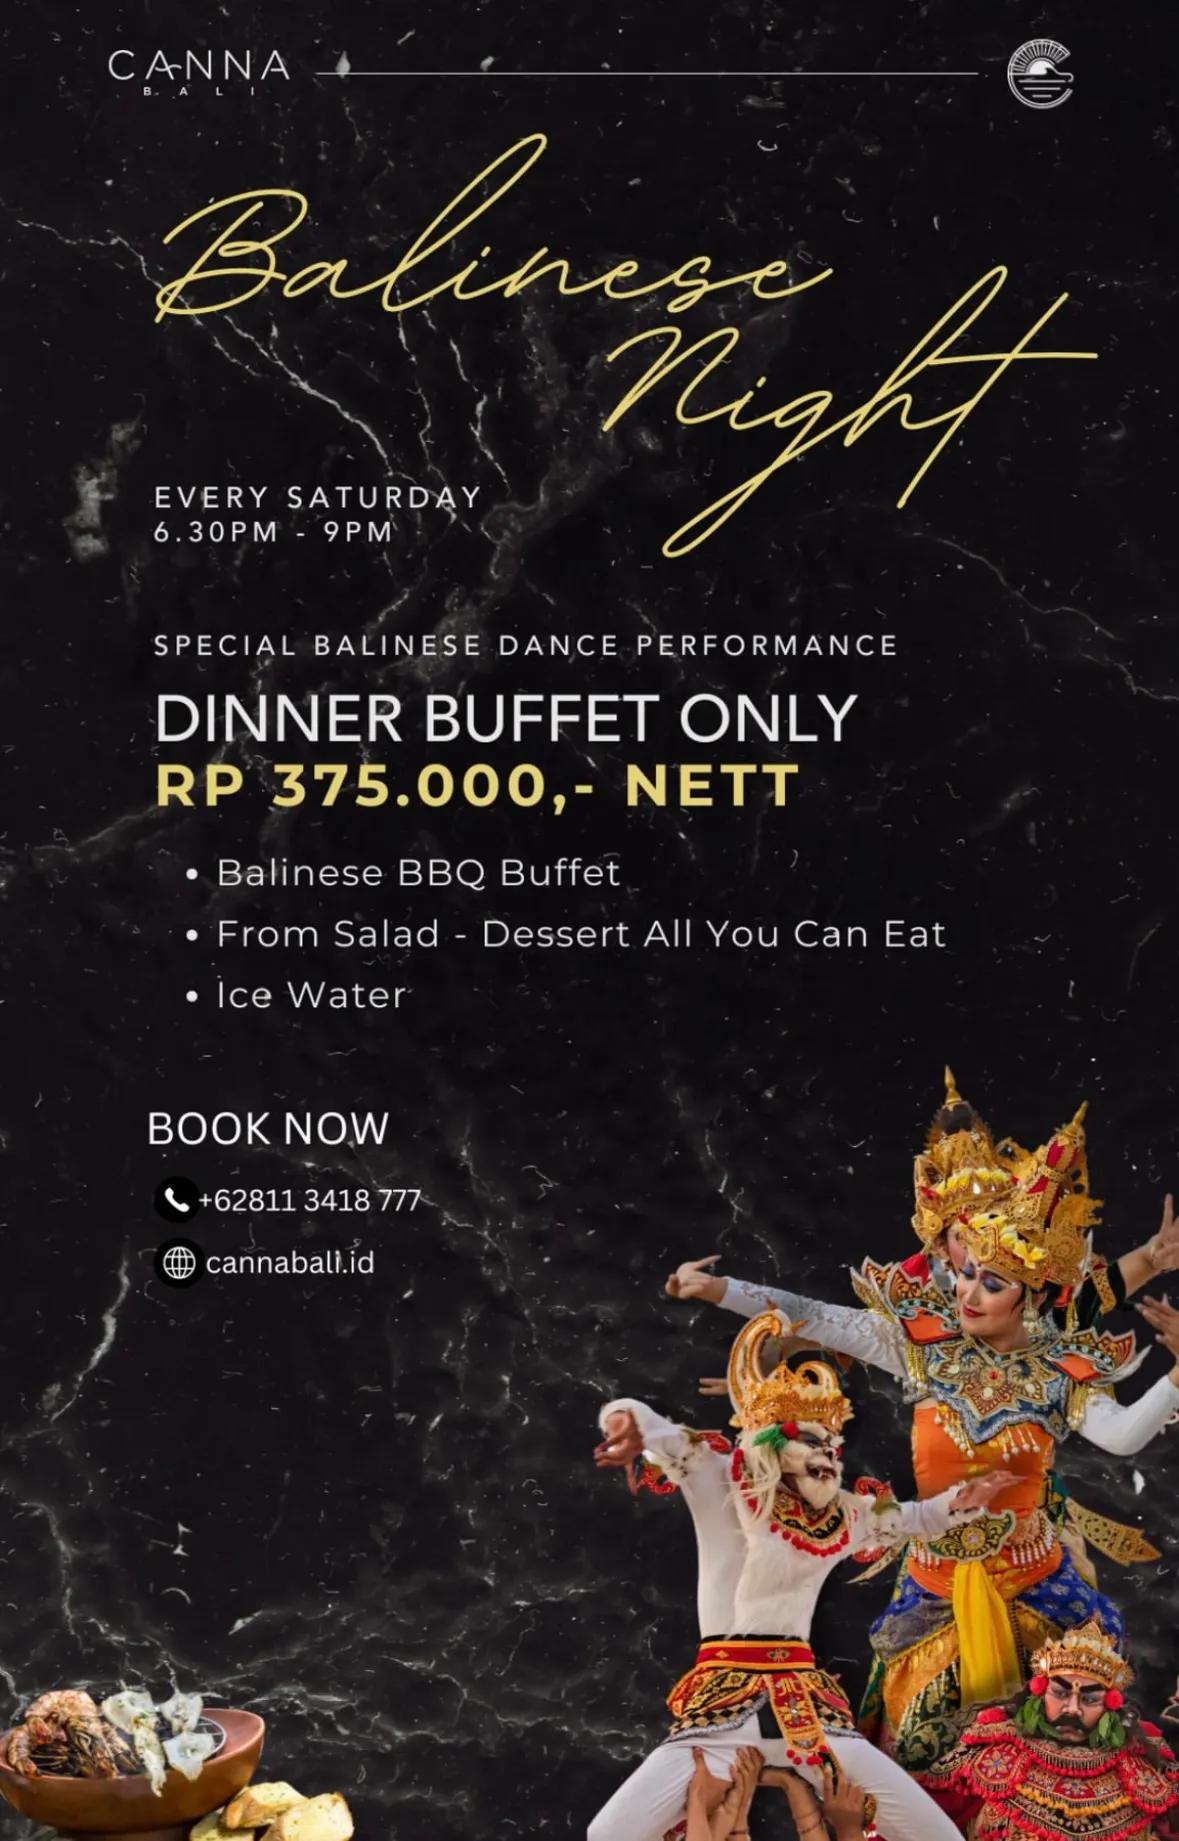 Event at Canna every Saturday 2024: Balinese Night